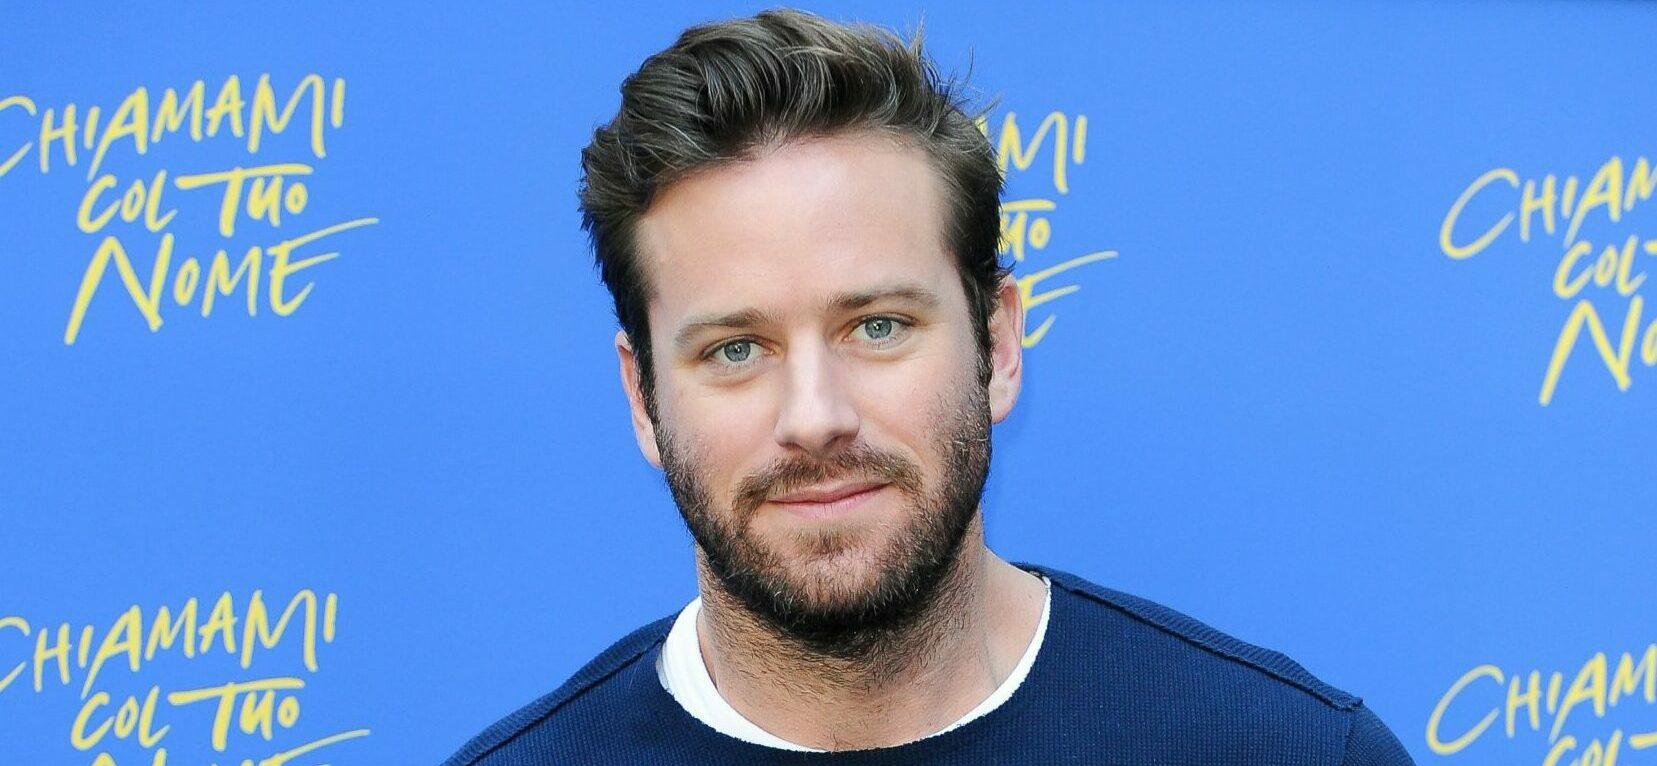 Armie Hammer at the "Call Me By Your Name" Photocall In Rome